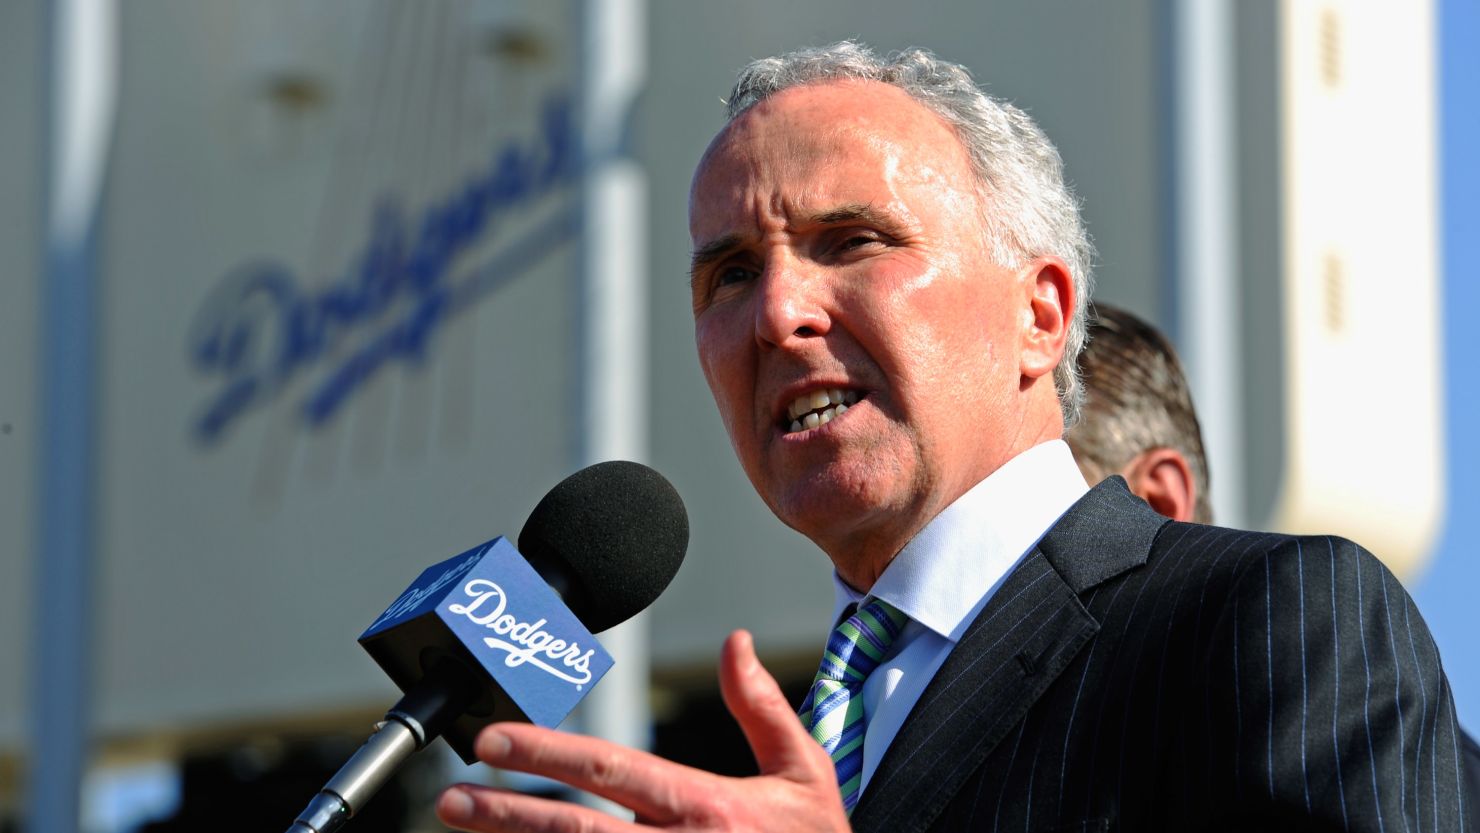 Los Angeles Dodgers owner Frank McCourt, who had been involved in a bitter divorce battle, has agreed to sell the team.